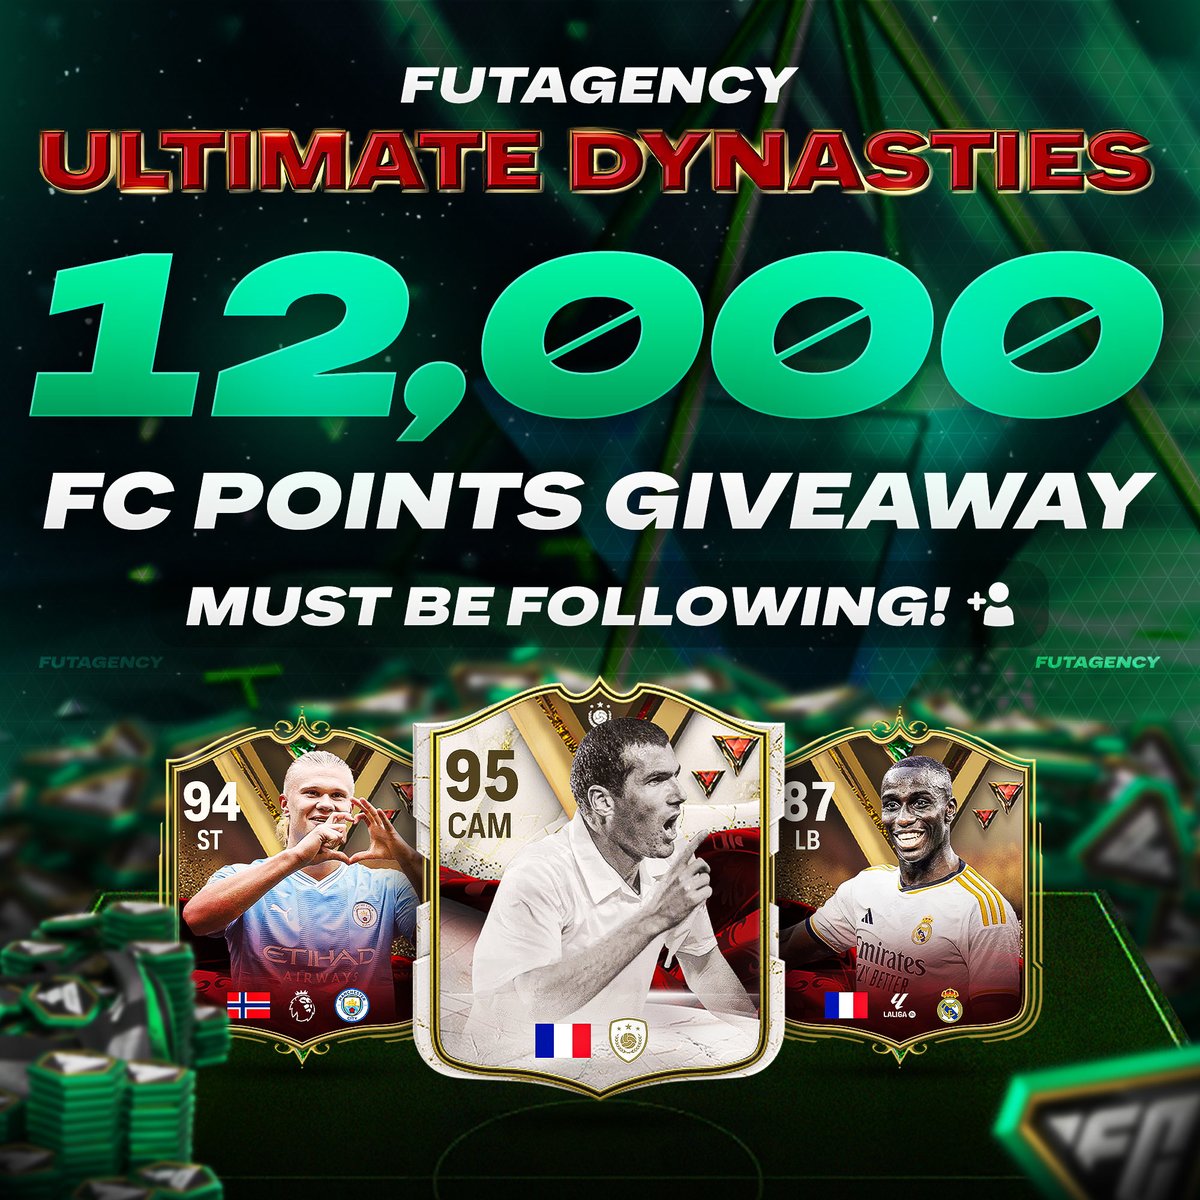 12k FC points giveaway 🎉 To enter: Follow @FUT_Agency Like & Retweet this post ❤️♻️ The winner will be picked in 24 hours. Good luck! 🍀